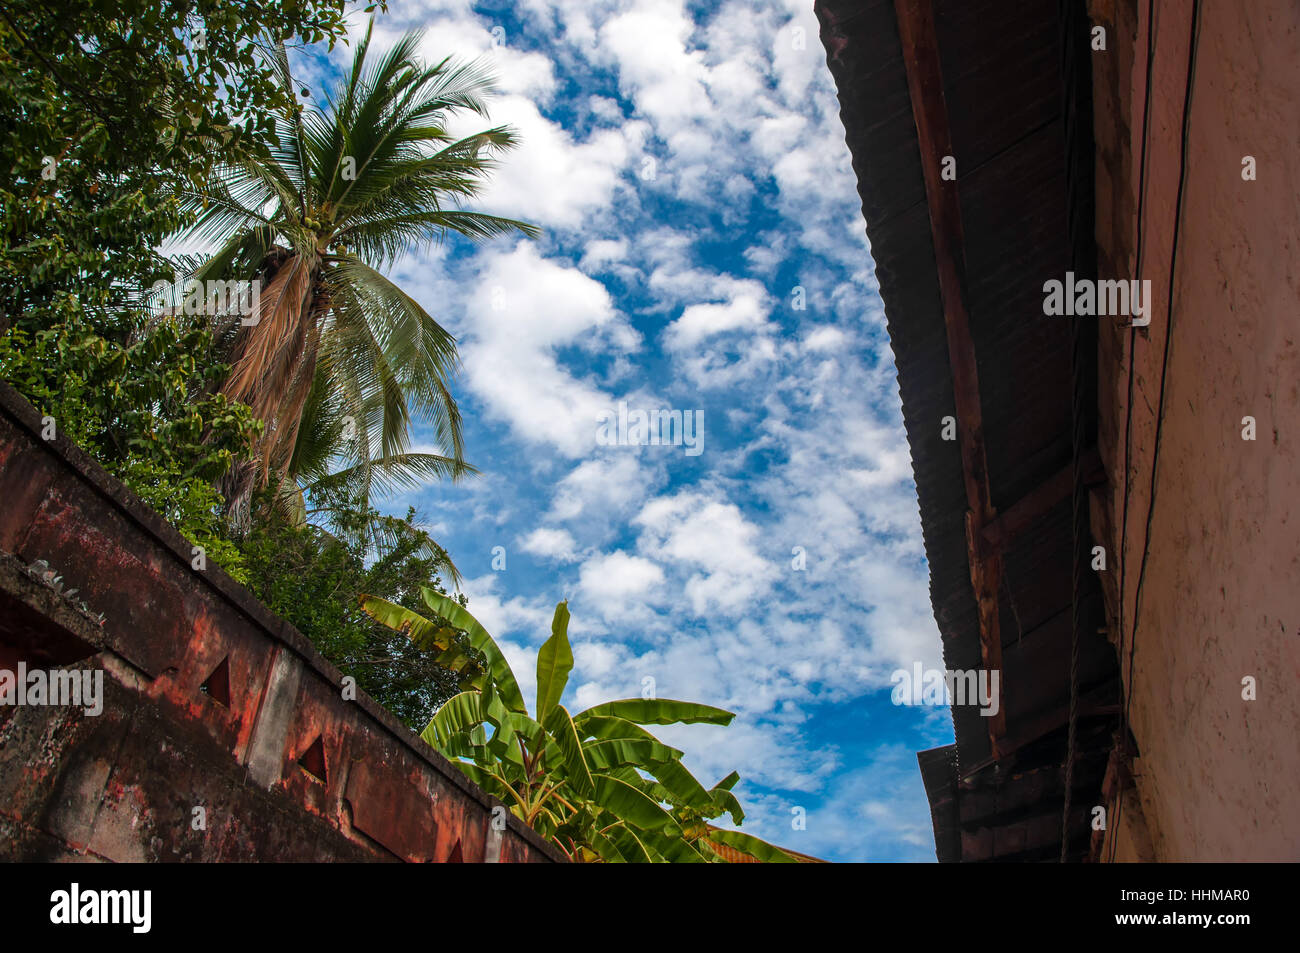 blue, tree, palm, clouds, firmament, sky, red, blue, beautiful, beauteously, Stock Photo